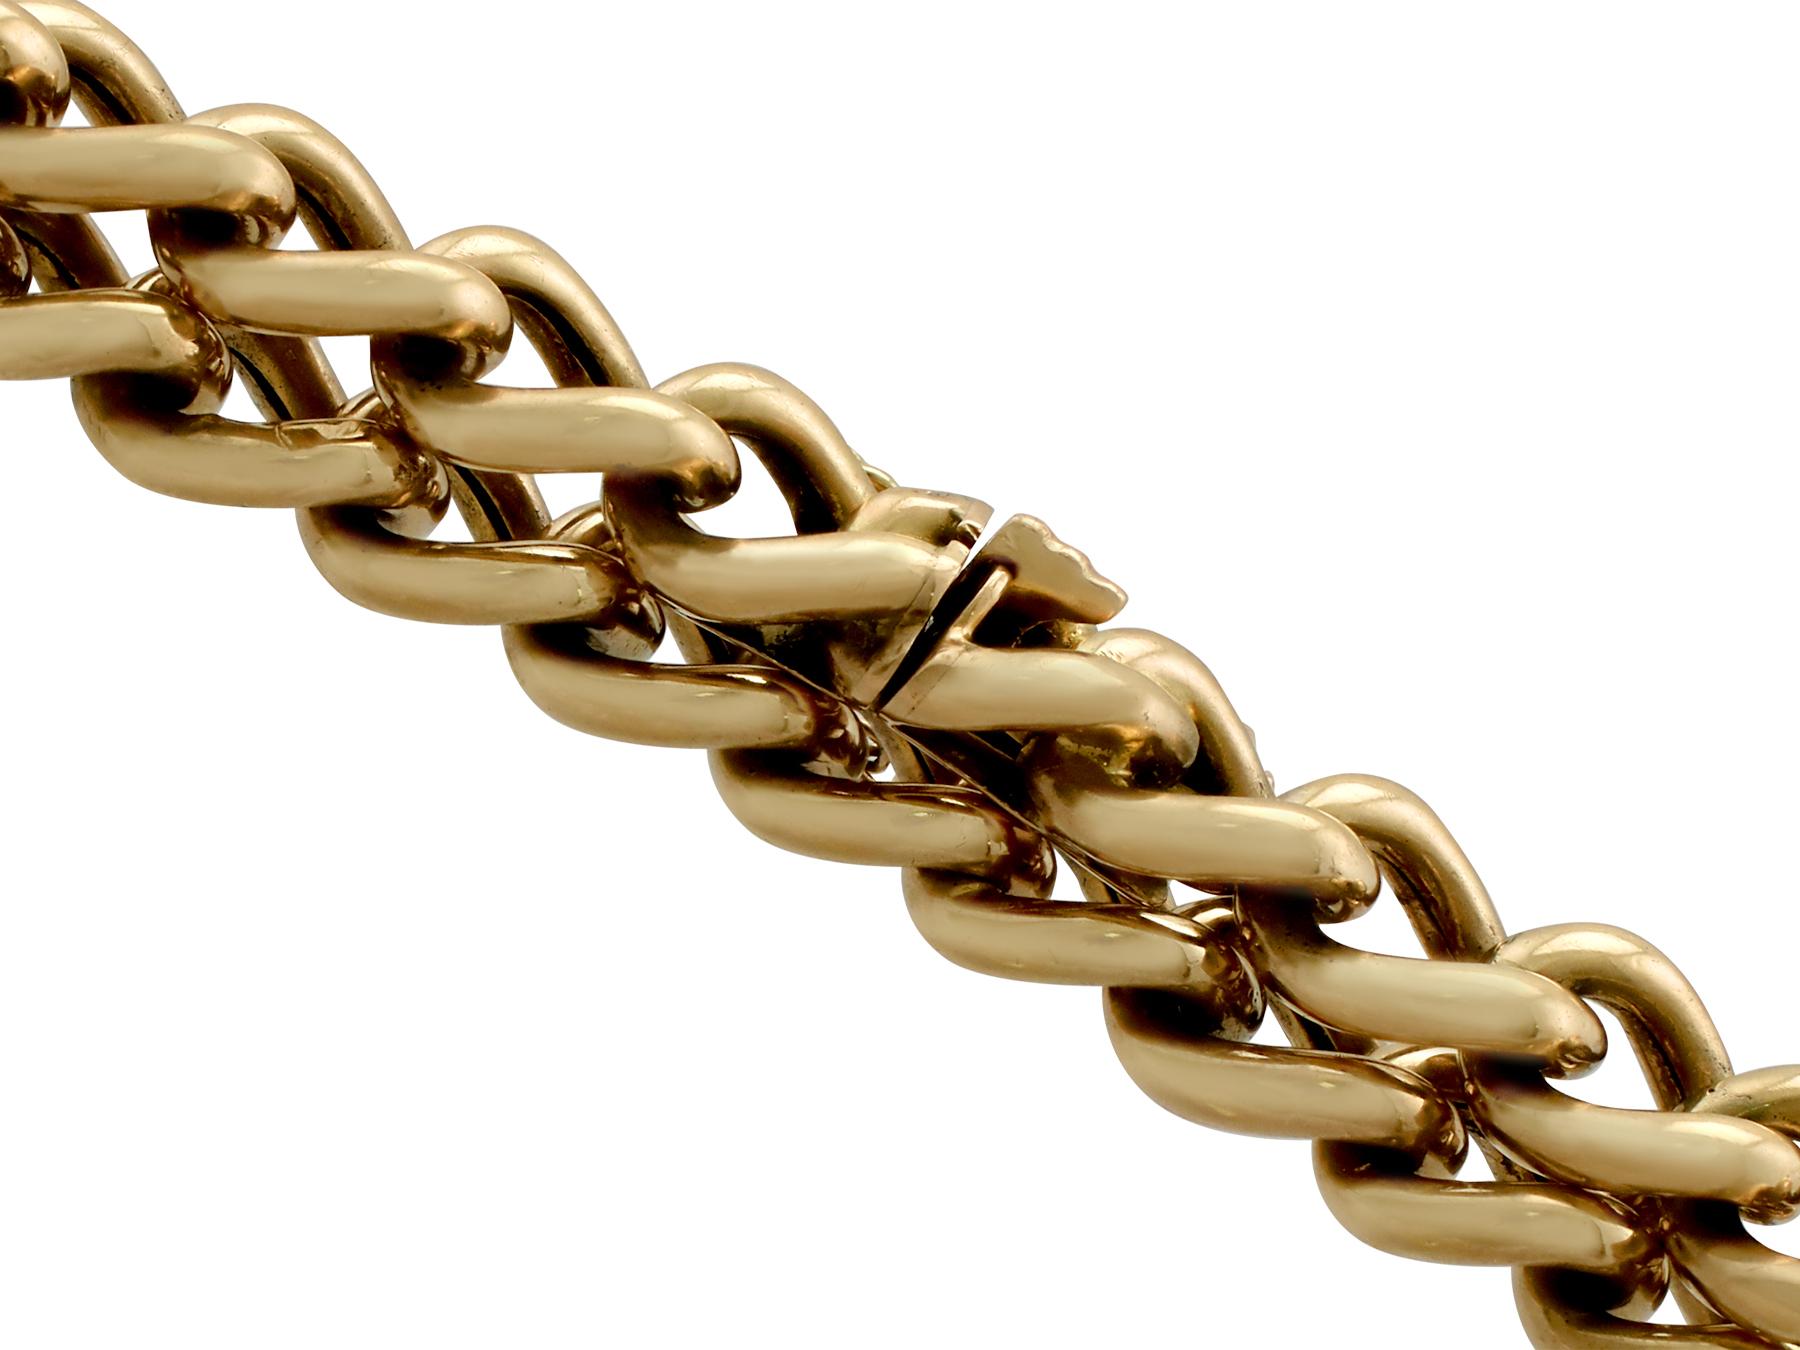 A fine and impressive antique 9 karat yellow gold curb link bracelet; part of our diverse antique jewelry and estate jewelry collections

This fine and impressive antique bracelet has been crafted in 9k yellow gold.

The thirty curb links that make